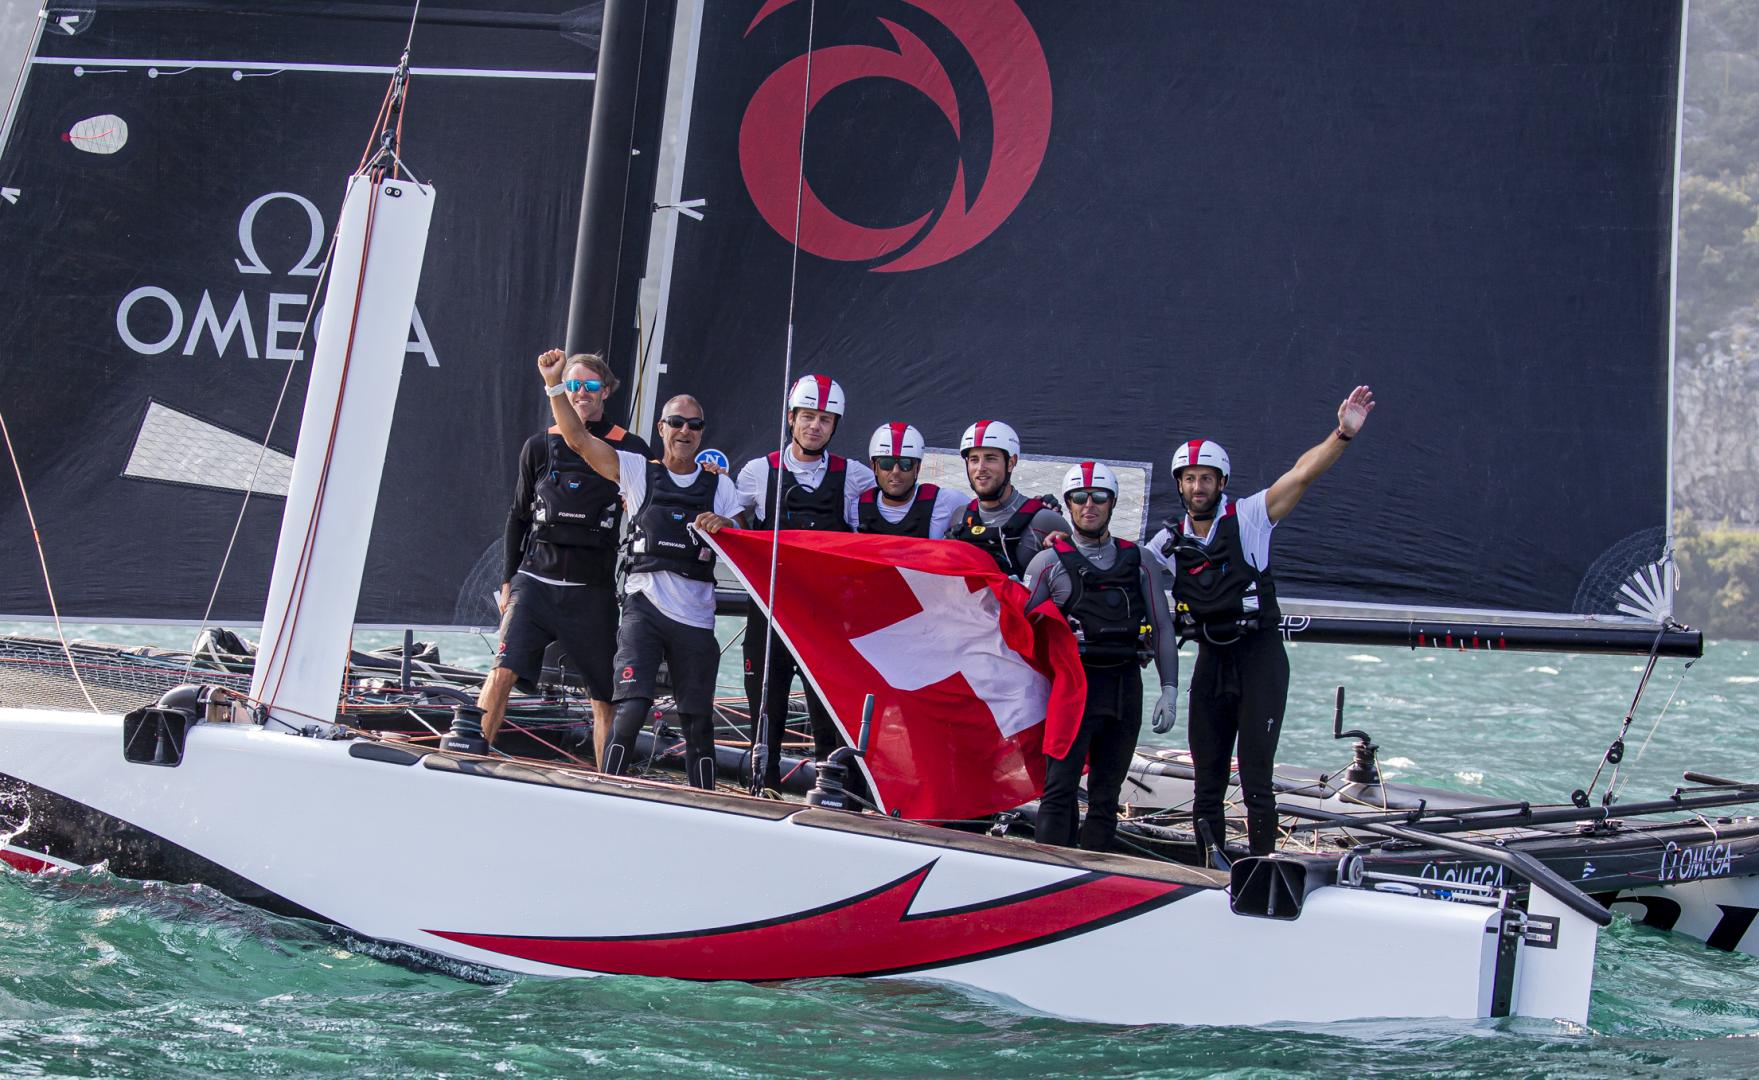 GC32 Racing Tour: Alinghi claims GC32 Riva Cup by a whisker